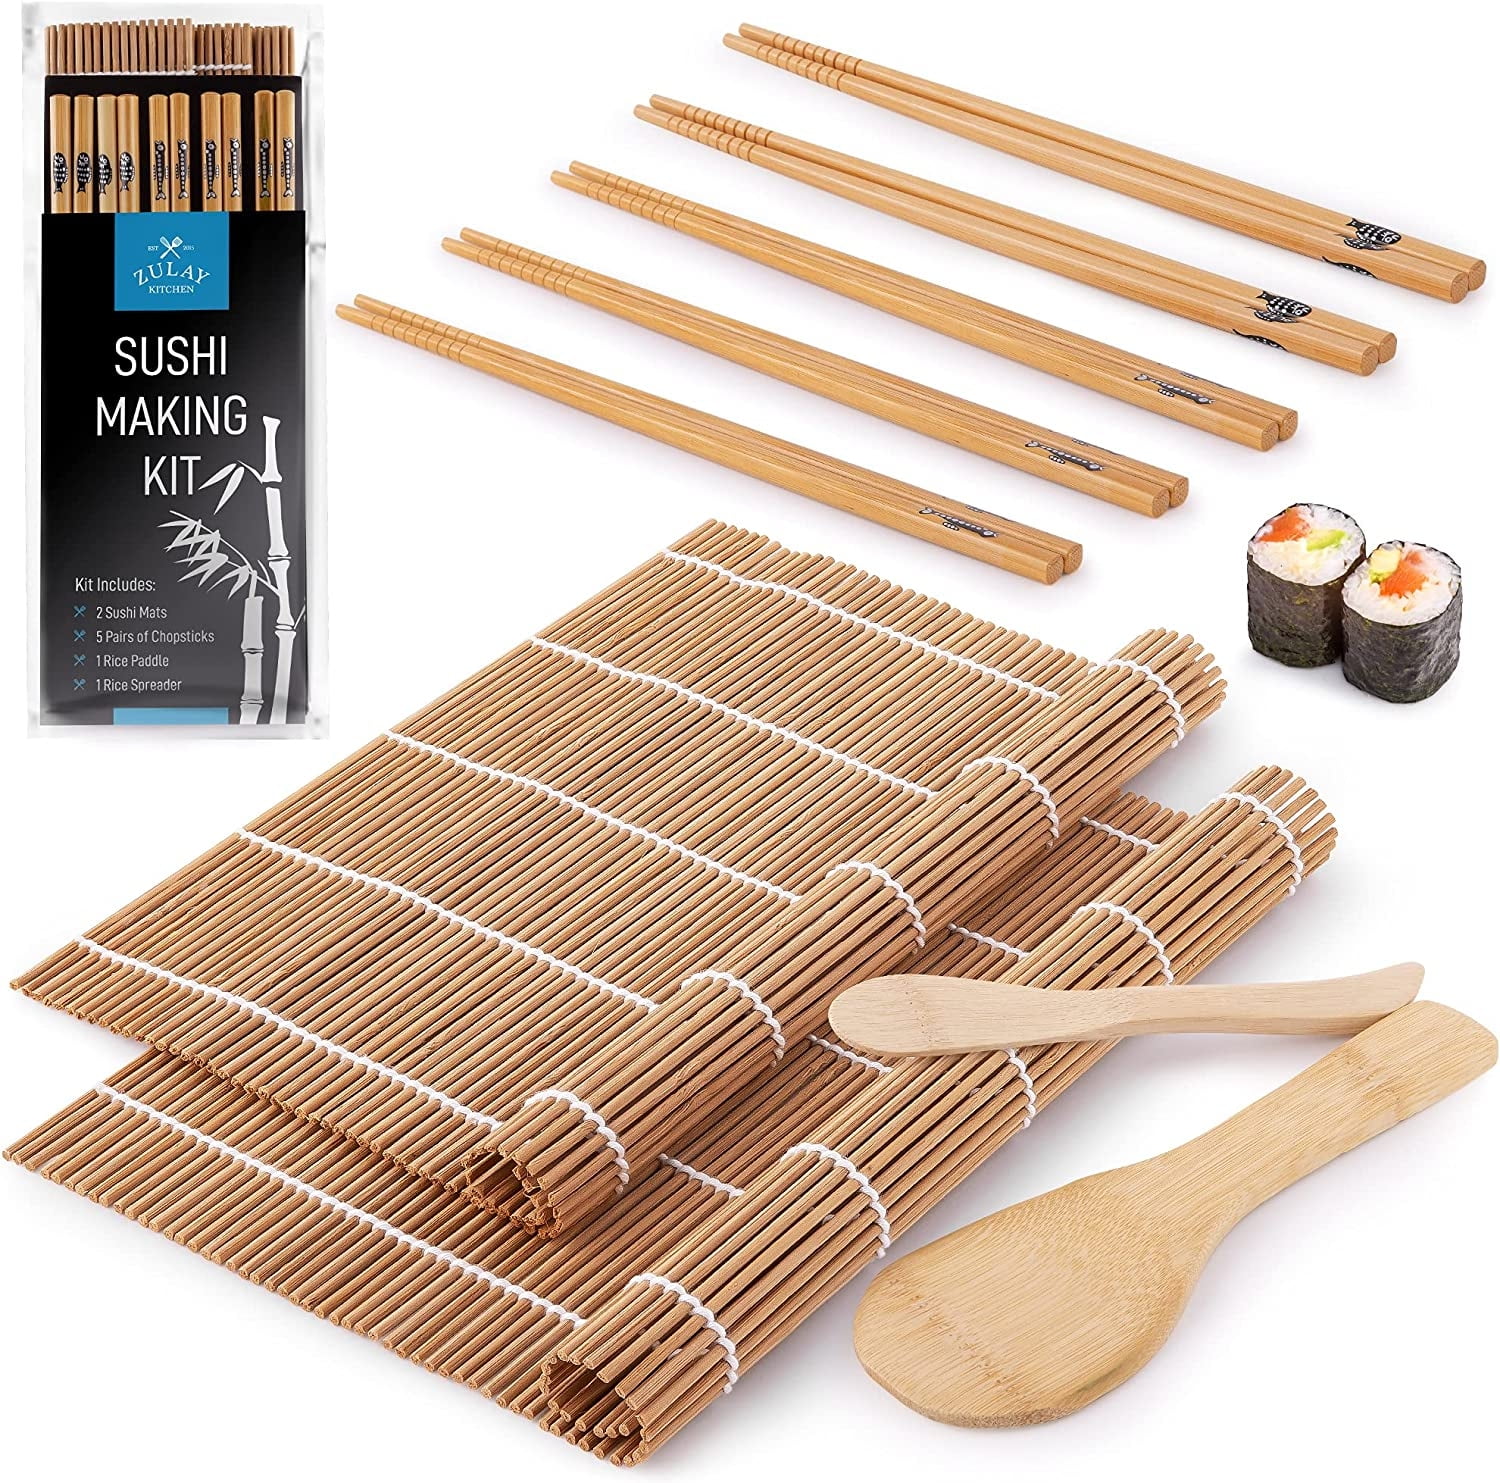 Sushi Making Kit For Beginners - 22 Piece DIY Sushi Roller Kit with Bamboo  Su